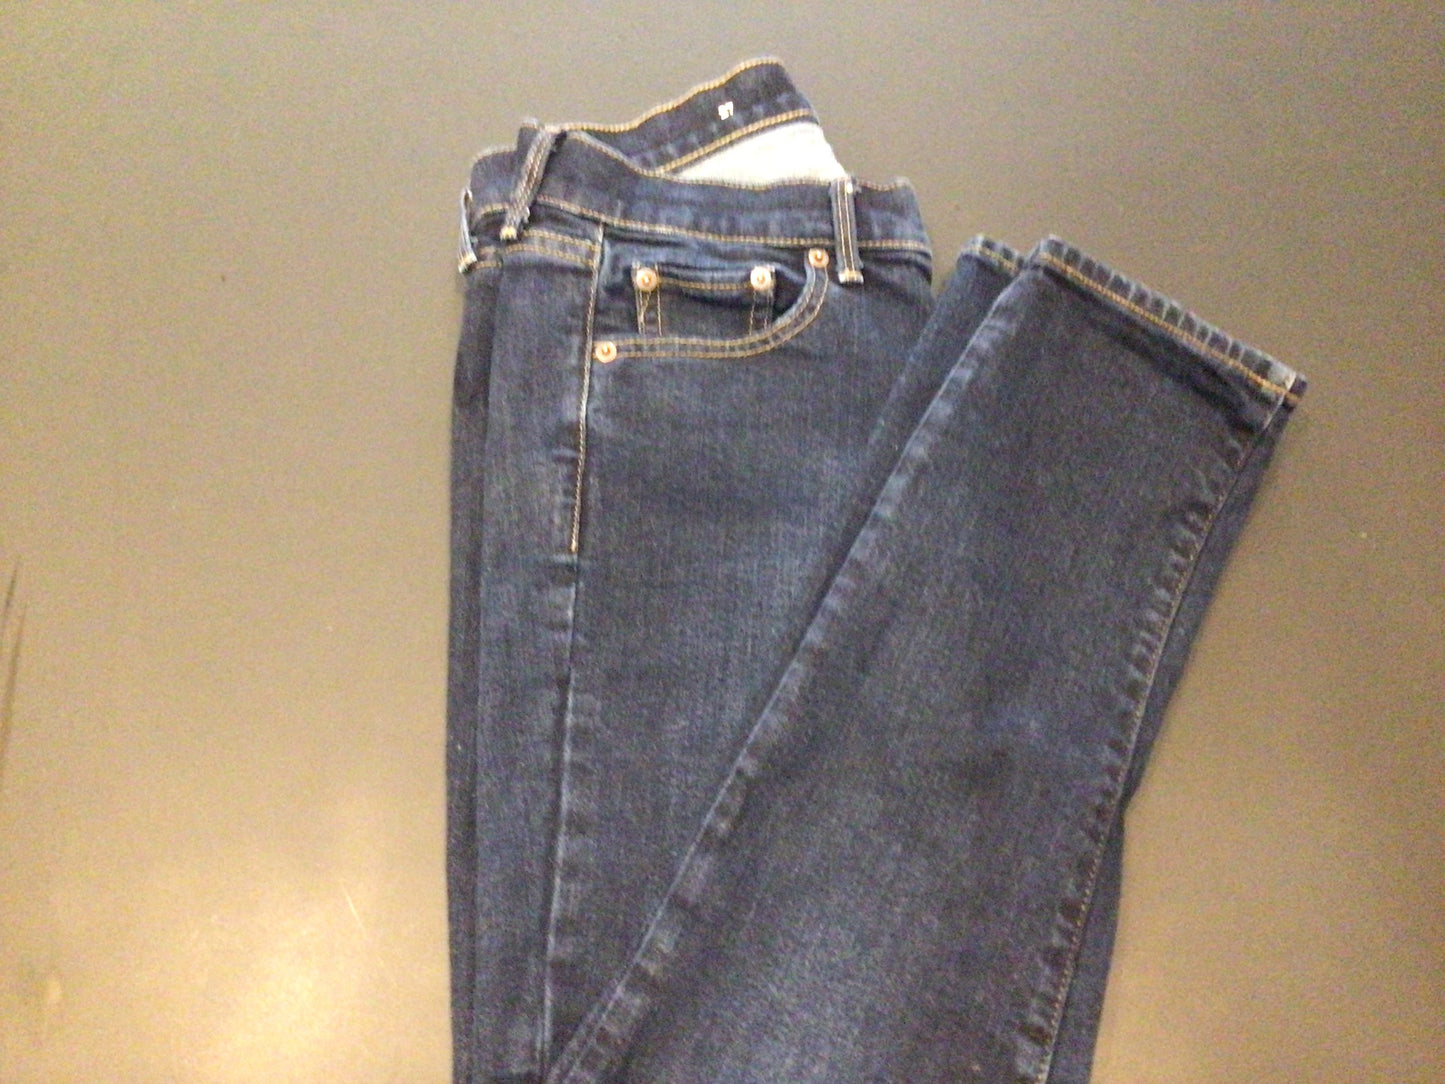 Consignment 1011-07 Gap 1969 jeans size 27